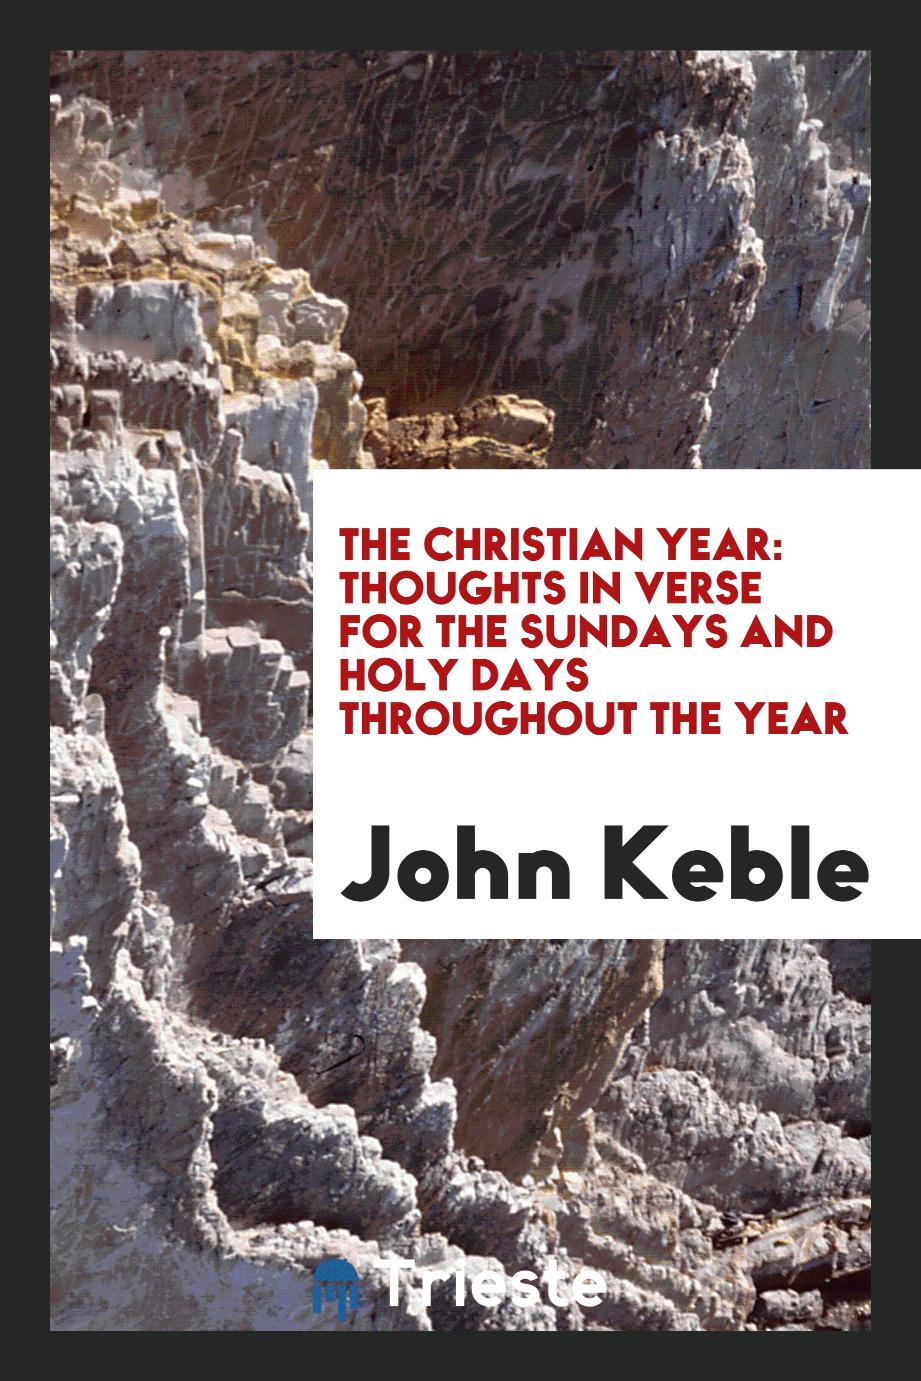 The Christian Year: Thoughts in Verse for the Sundays and Holy Days Throughout the Year